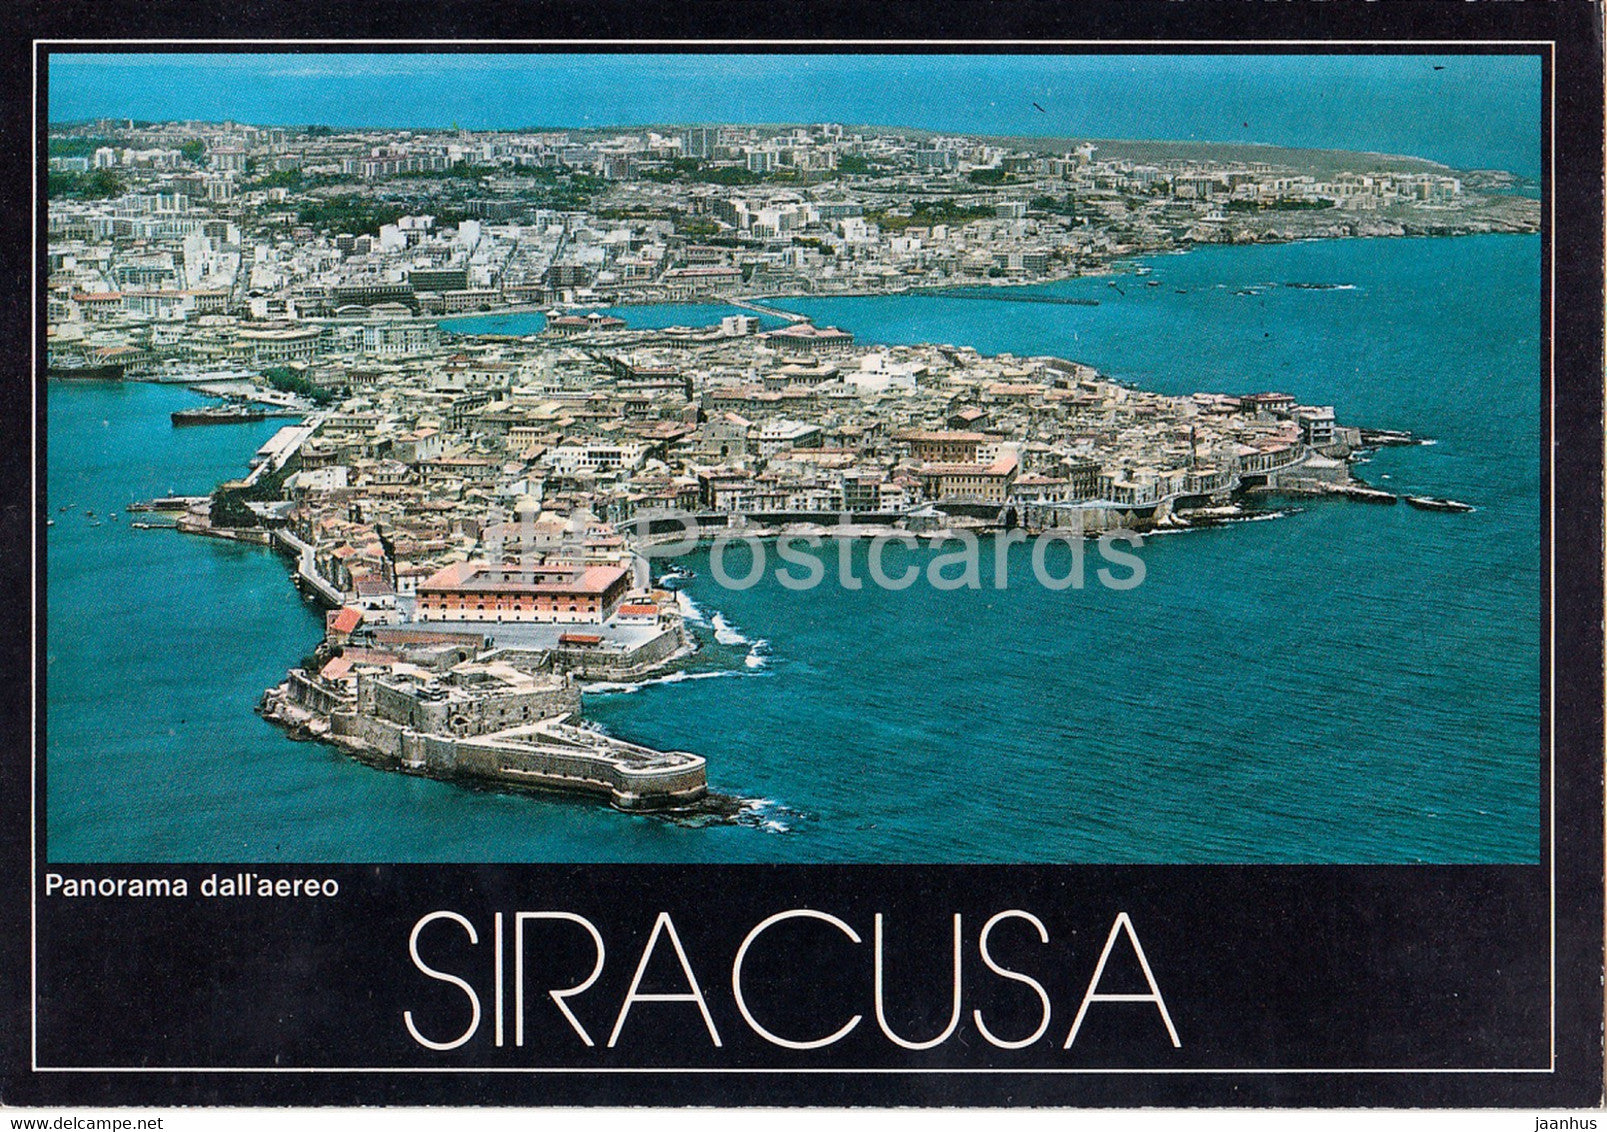 Siracusa - Panorama dall'aereo - View from the Airplane - 14492 - Italy - unused - JH Postcards